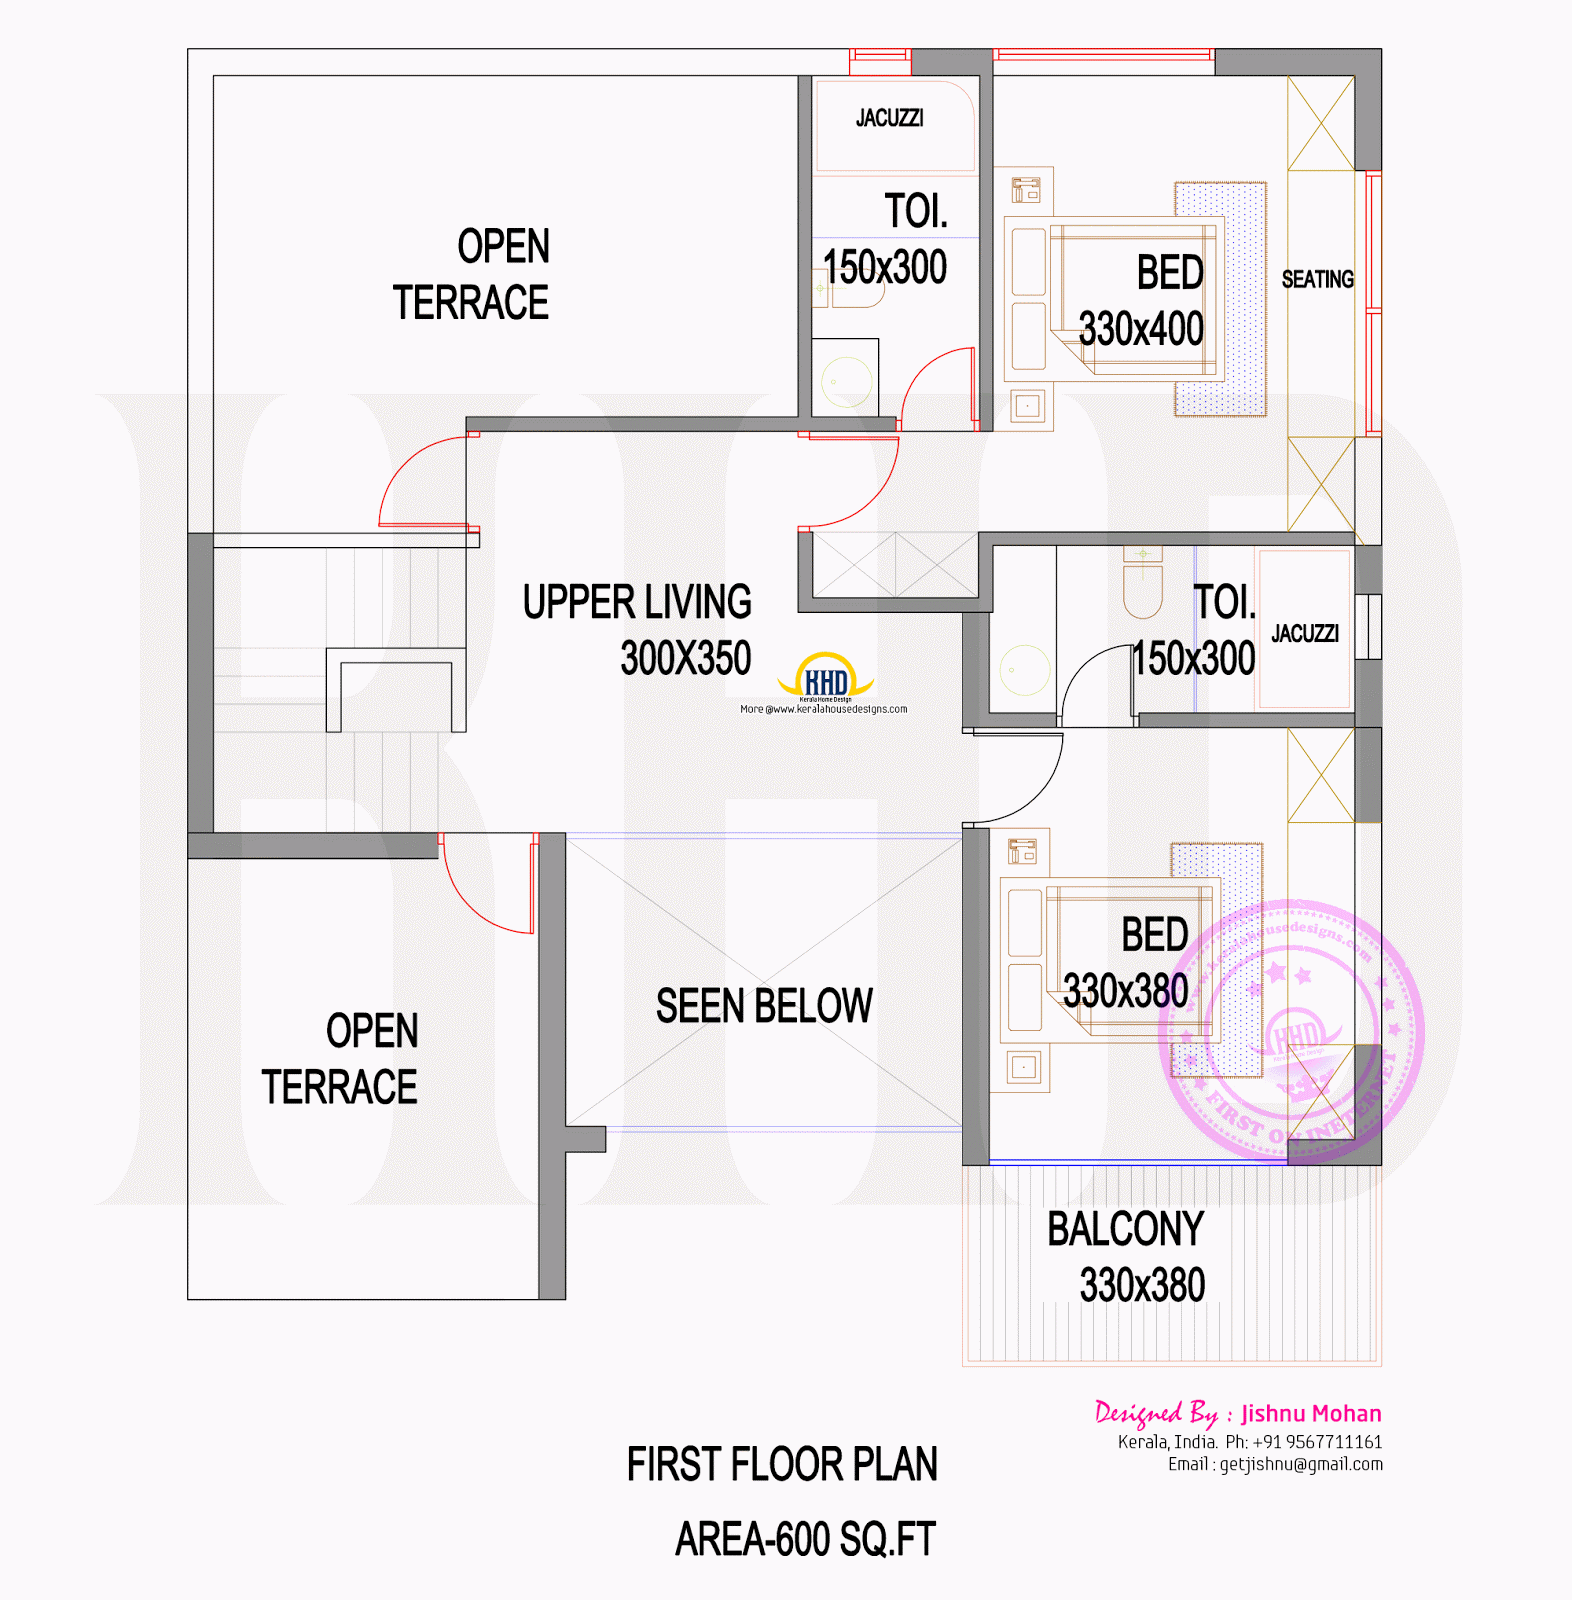  House  plan  elevation and plot plan  keralahousedesigns